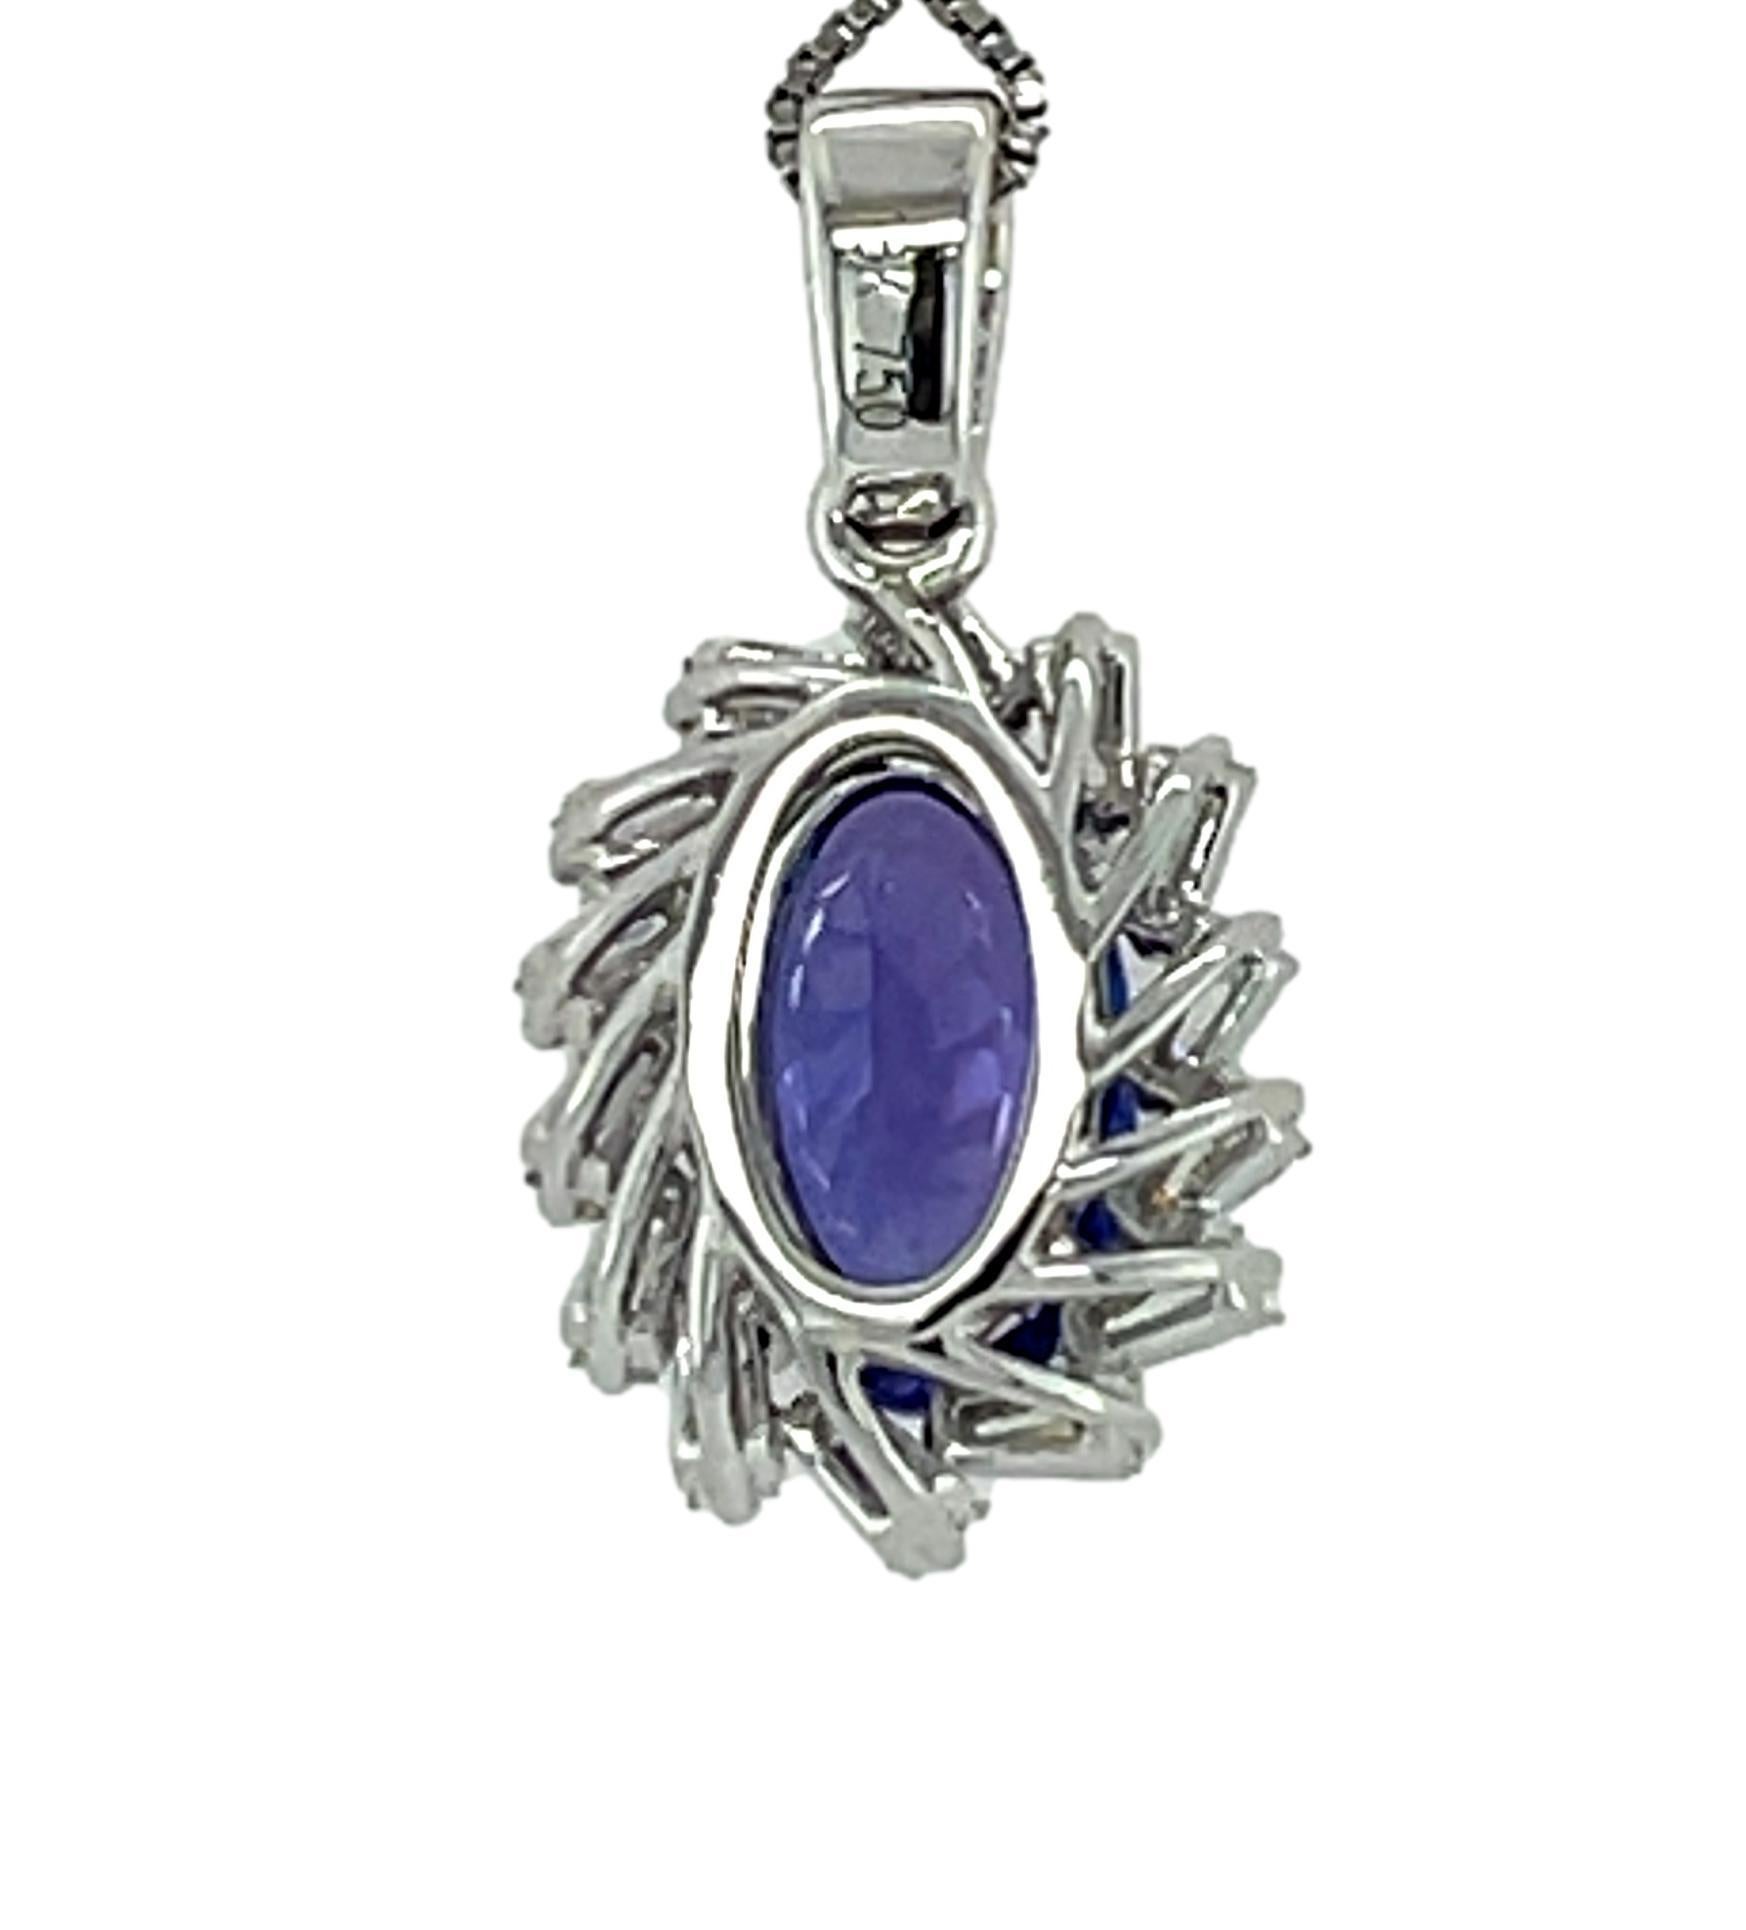 This stunning Tanzanite and diamond pendant is beautiful to wear on that special occasion. It has a 10x6 mm oval cut AAA quality Tanzanite with 4 prong setting in 18 karat white gold. There is a halo of 20 sparkling tapered baguette diamonds